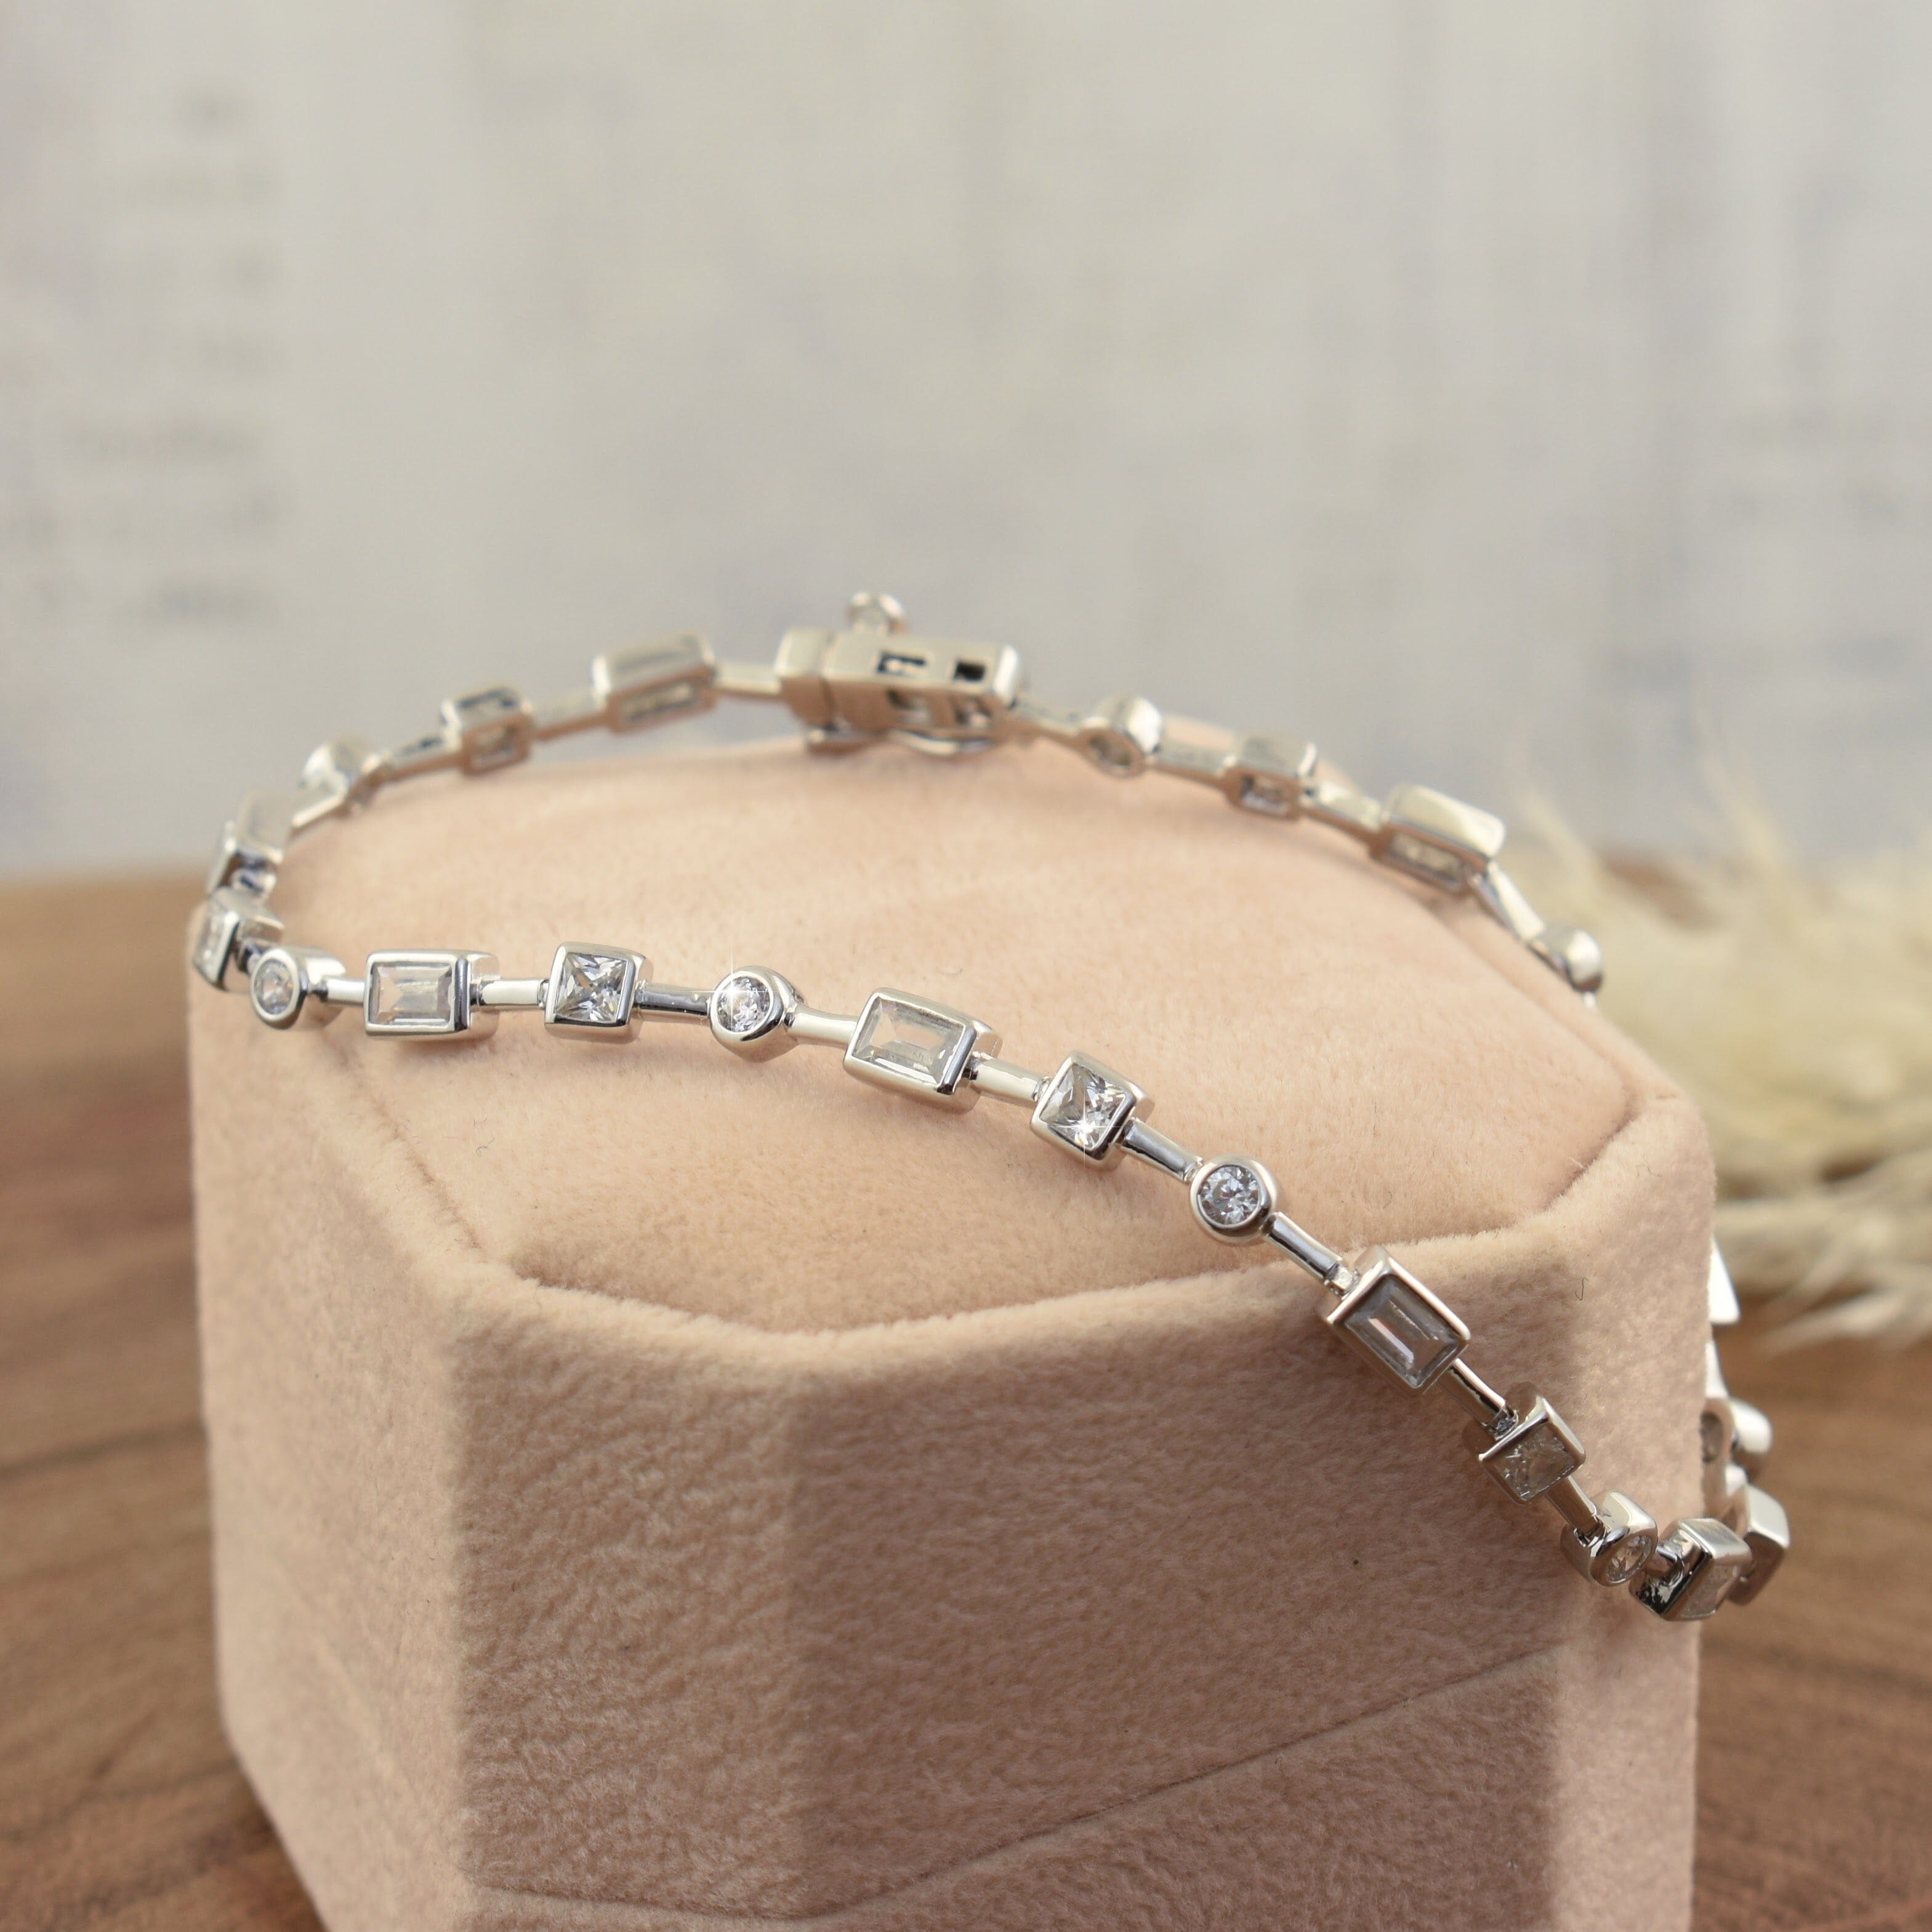 sterling silver and rhodium plated bracelet with three shapes of CZs throughout